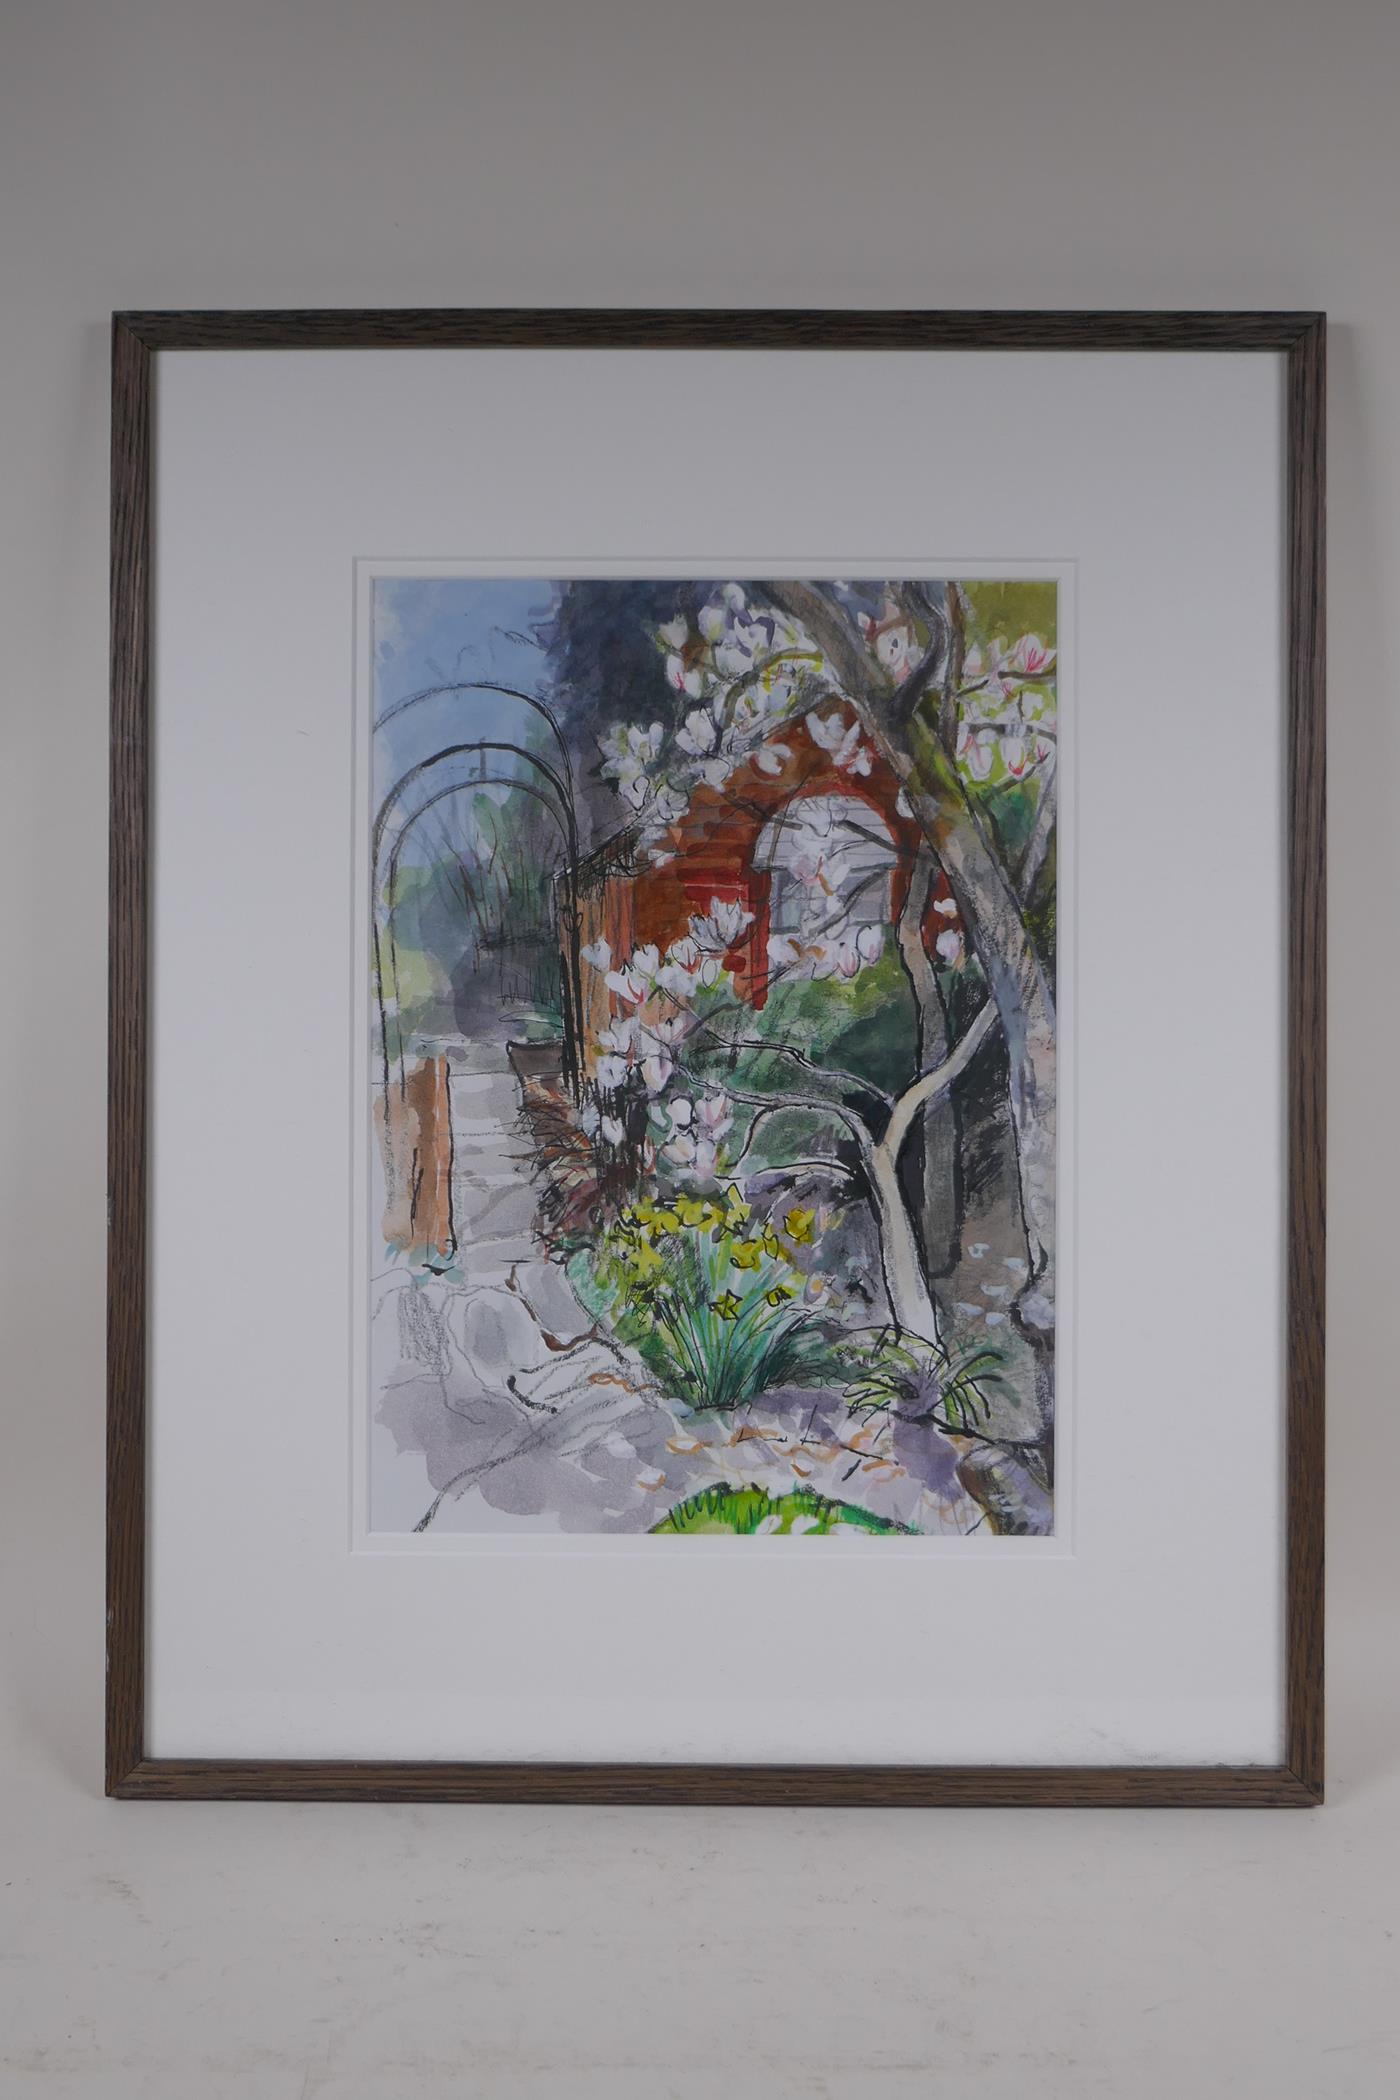 Attributed to David Mcleod Martin, Scottish (1922-2018), garden landscape, mixed media on paper, - Image 3 of 4